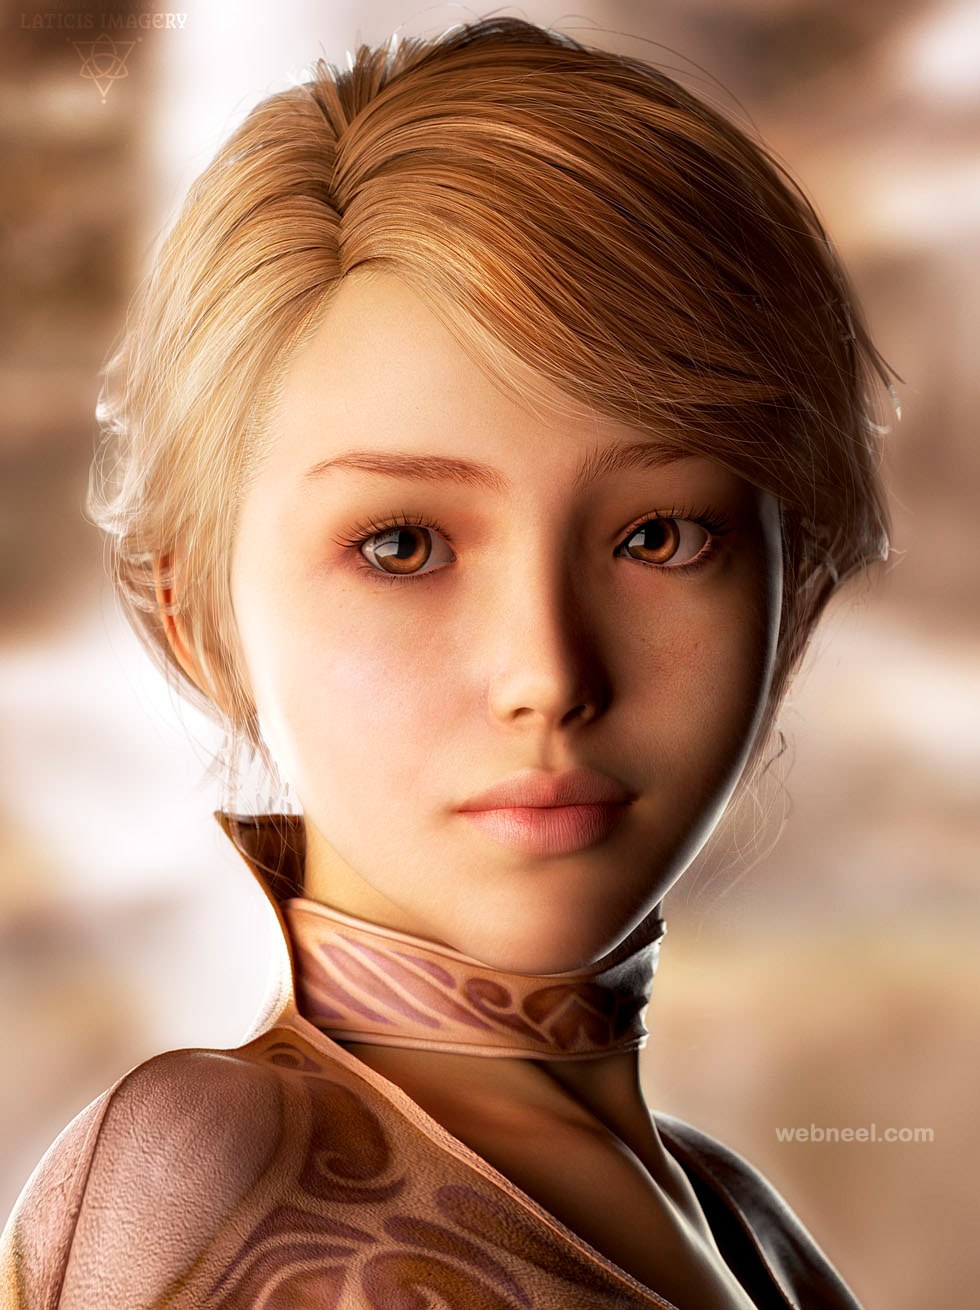 40 Most Beautiful 3D Woman Character designs and models 